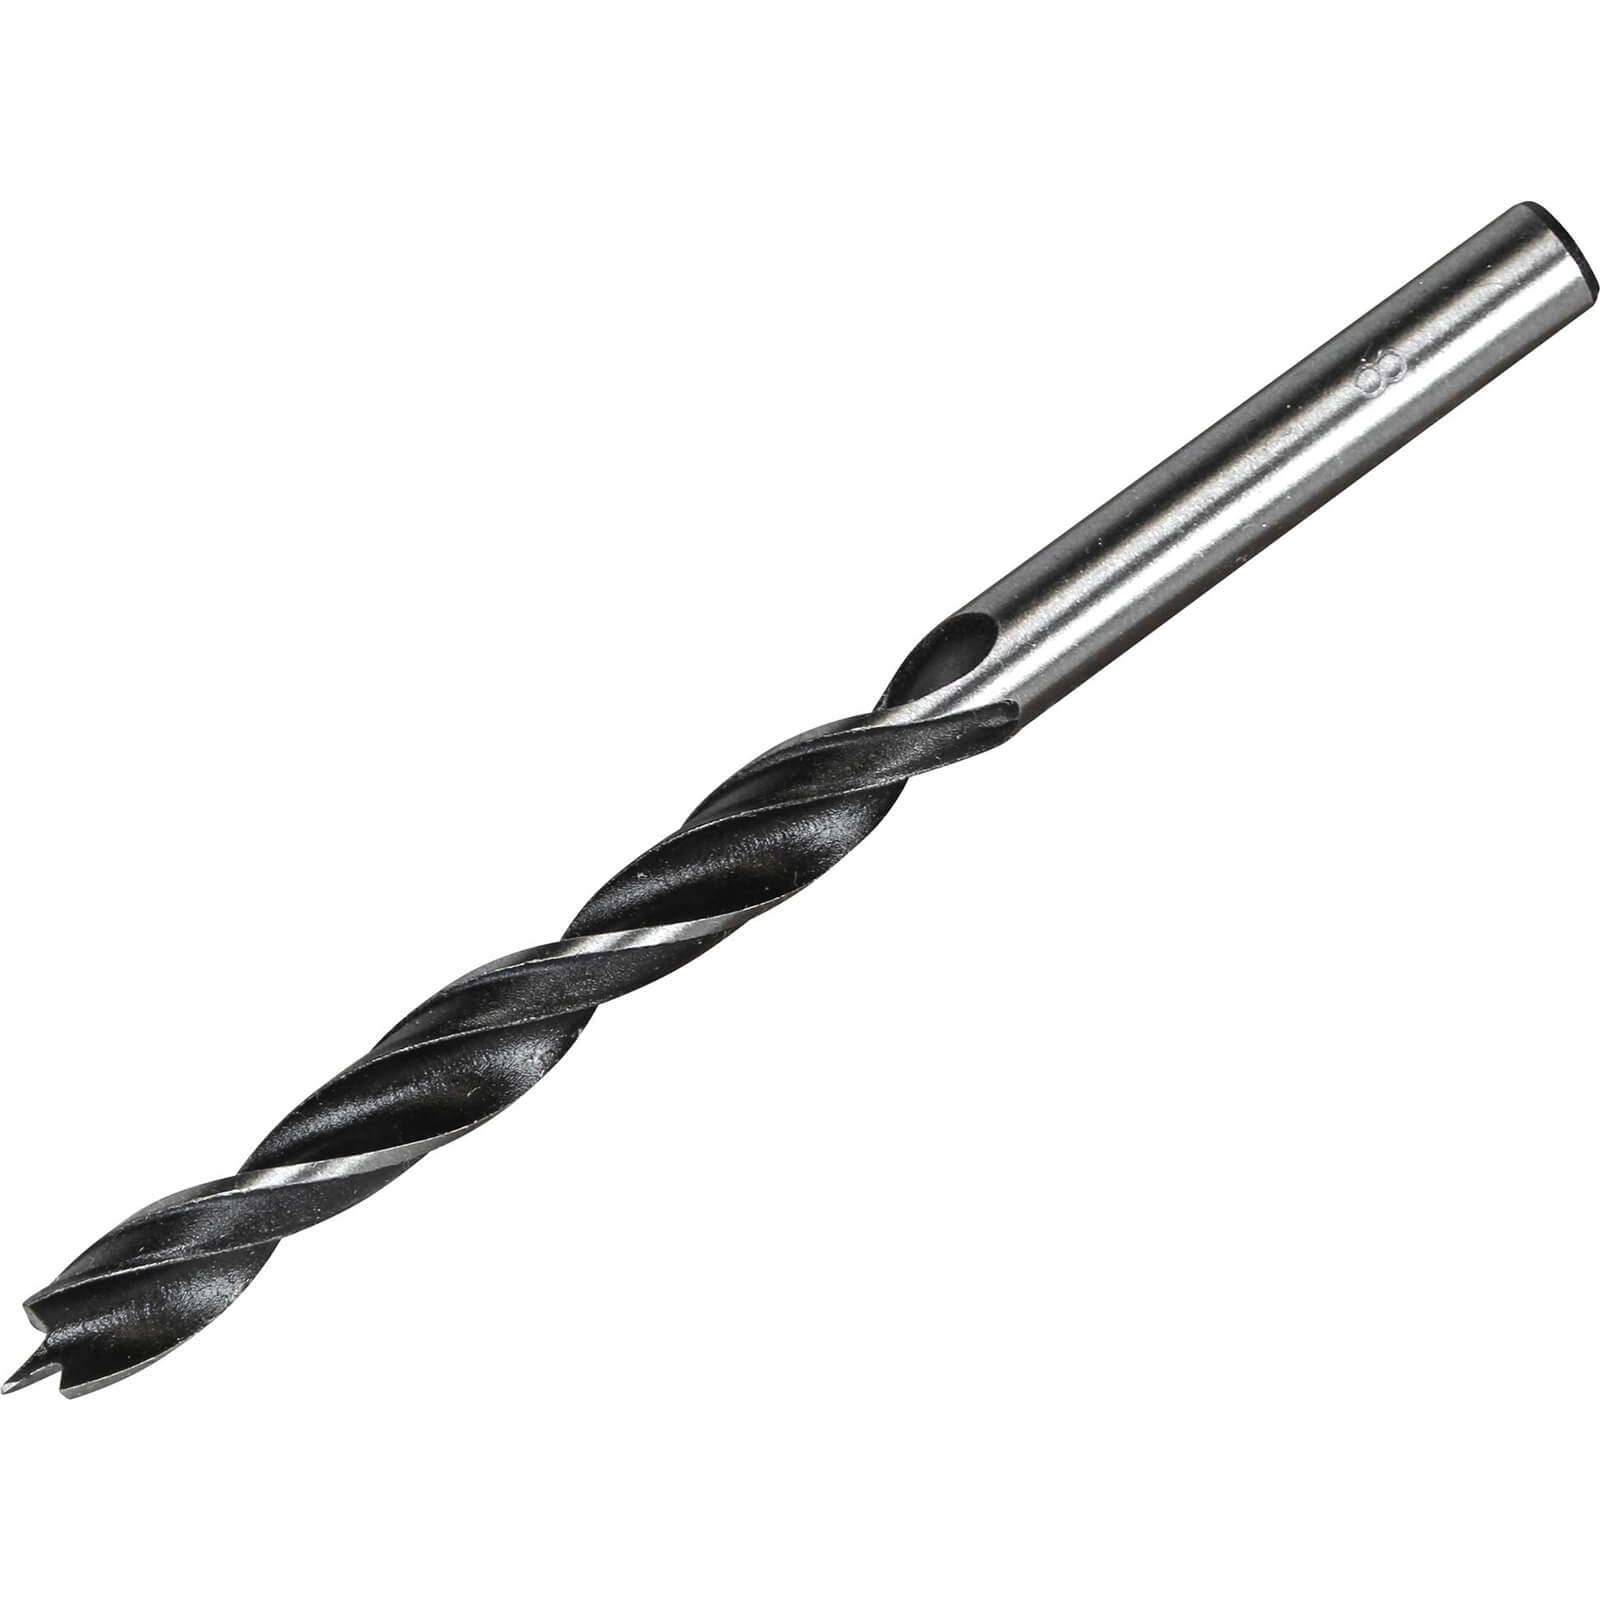 Photo of Faithfull Lip And Spur Wood Drill Bit 8mm